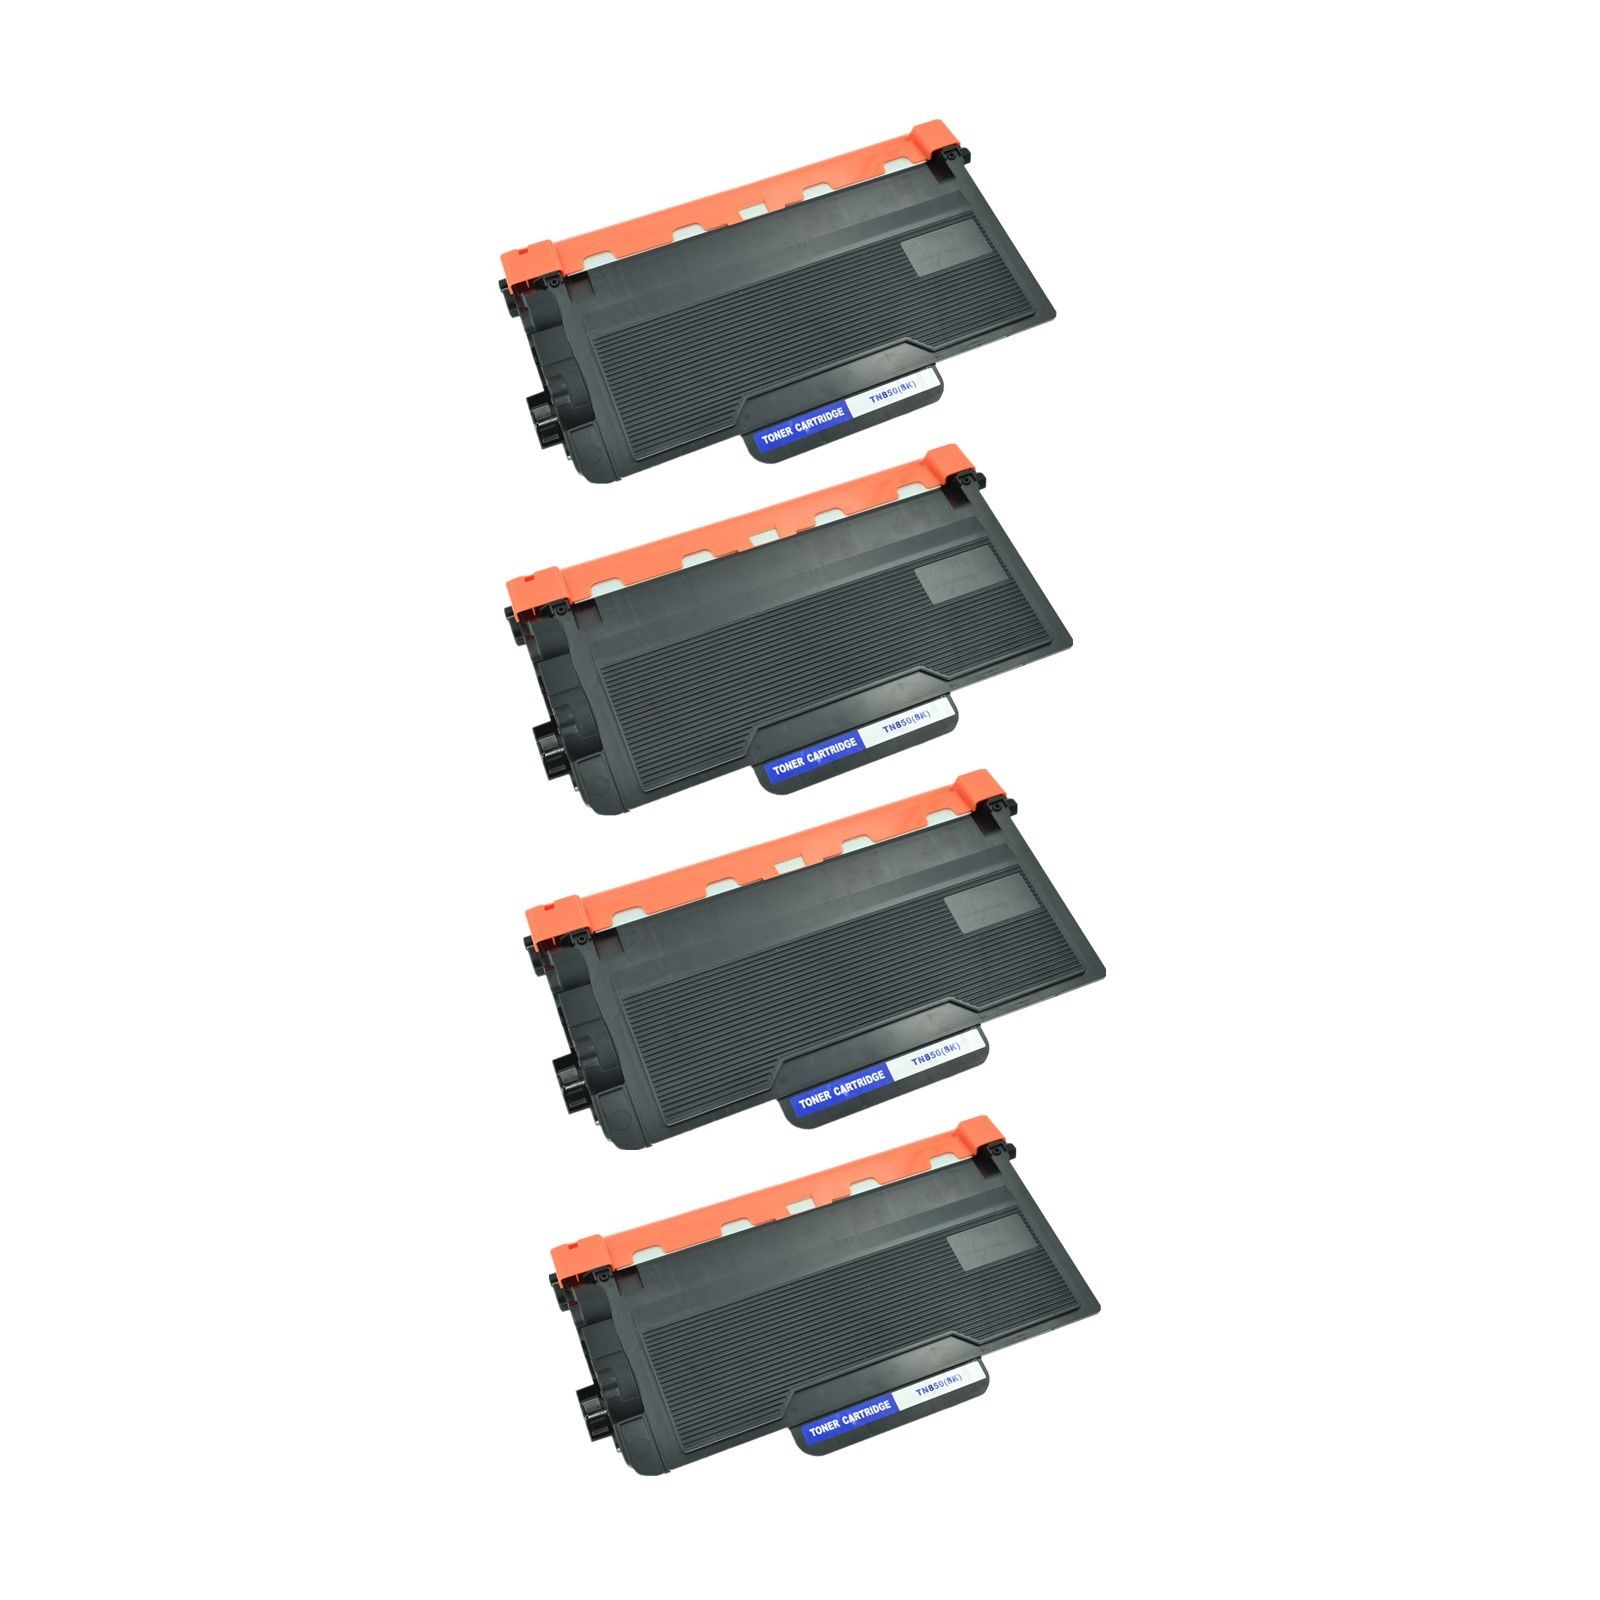 BROTHER TN-850 TN850 4 PACK COMBO COMPATIBLE Toner Cartridge click here for models